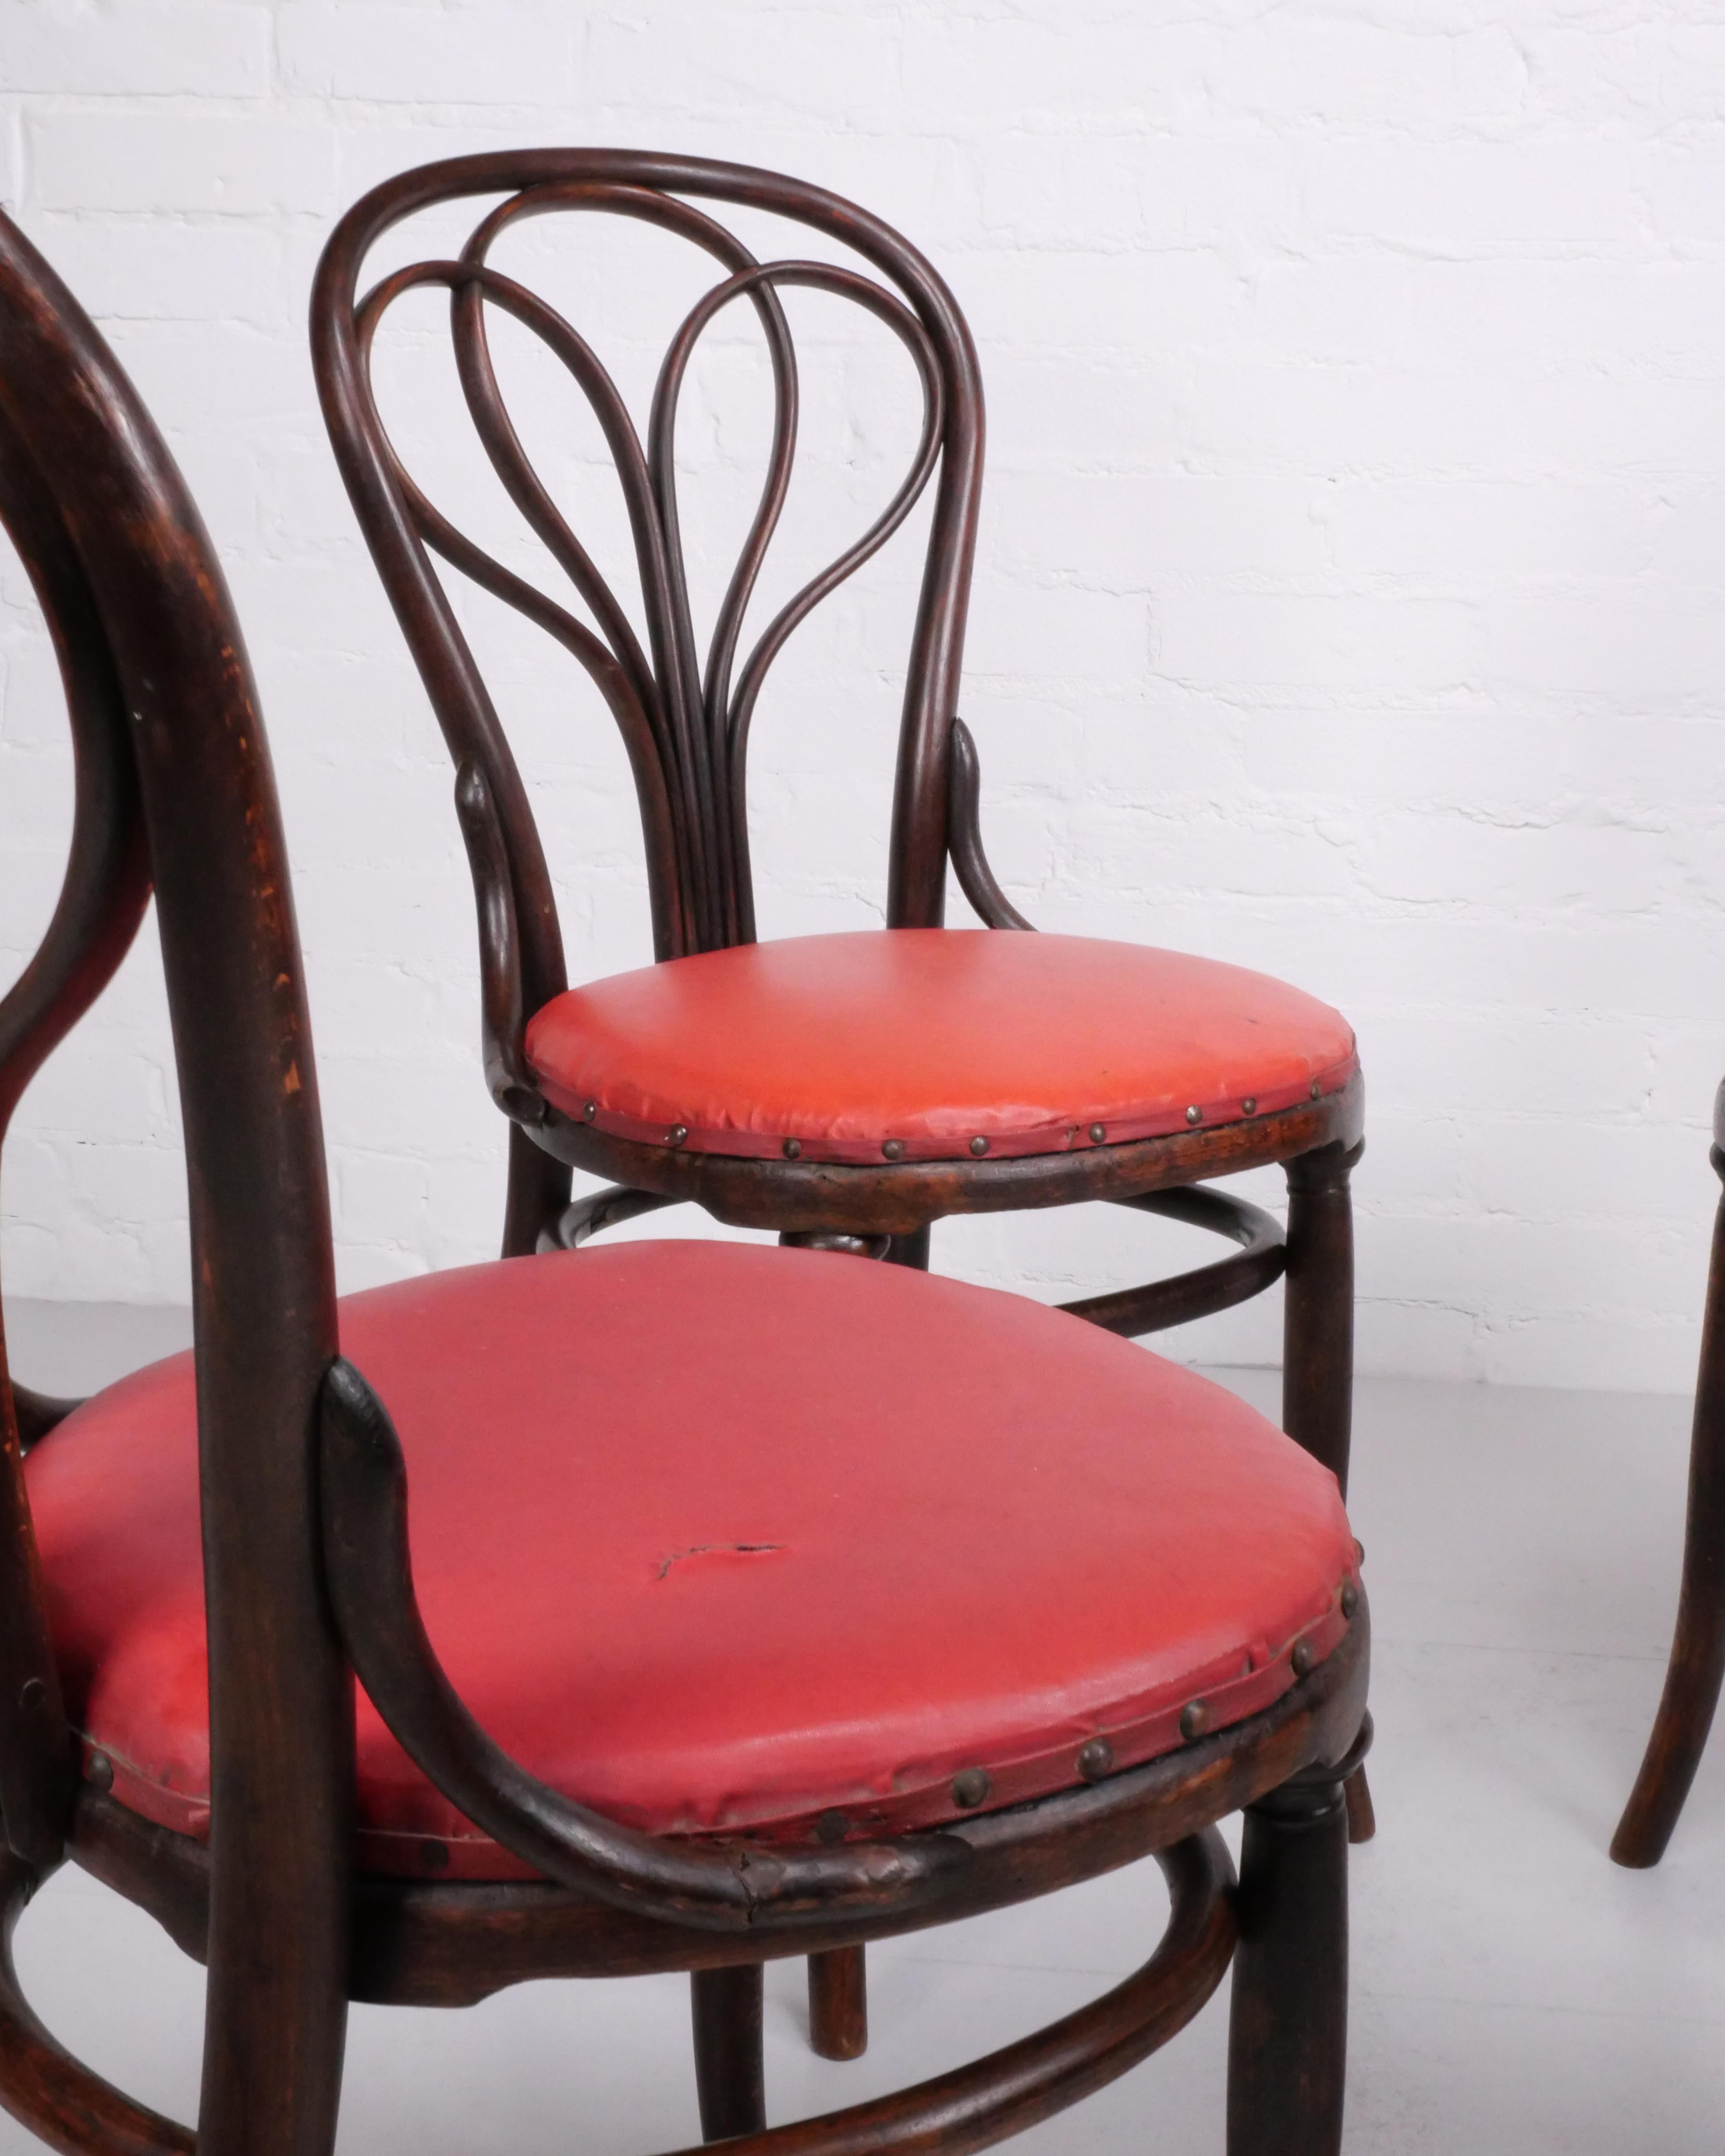 Set of 4 no.25 dining chairs by Gebrüder Thonet, c. 1870 For Sale 1